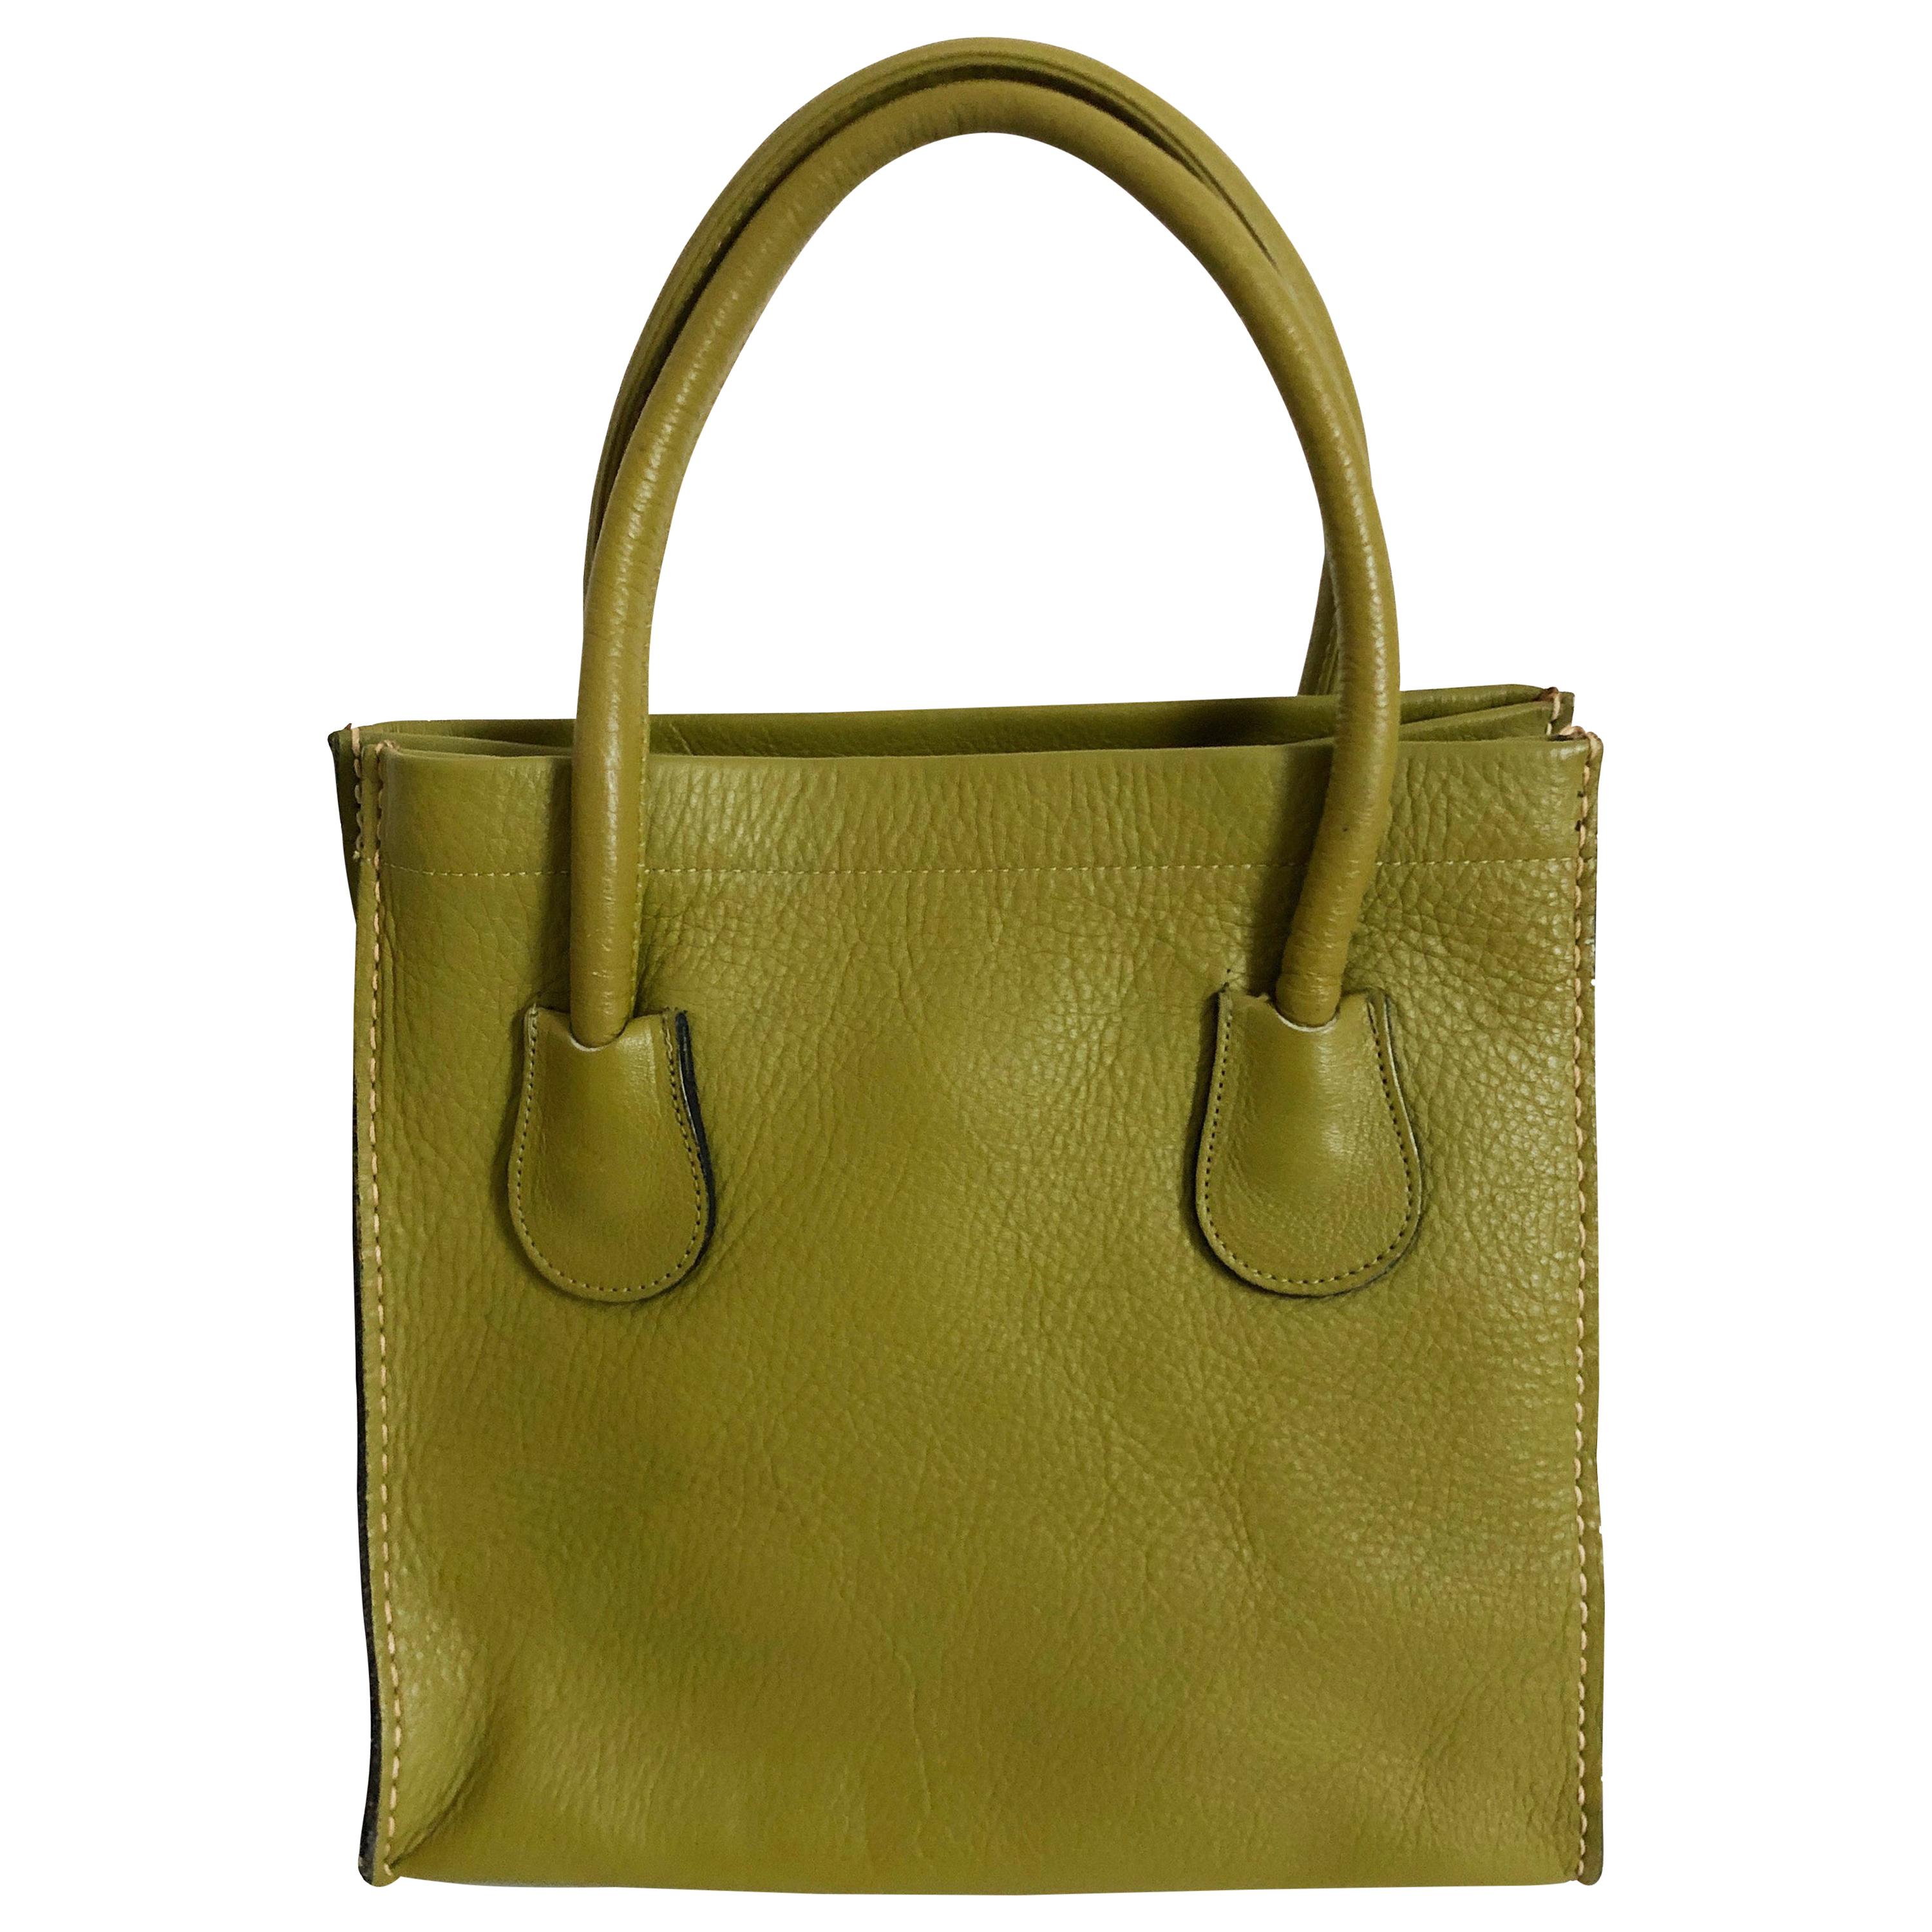 Bonnie Cashin for Coach Dinky Tote Bag Cashin Carry Lime Green Leather 60s NYC 